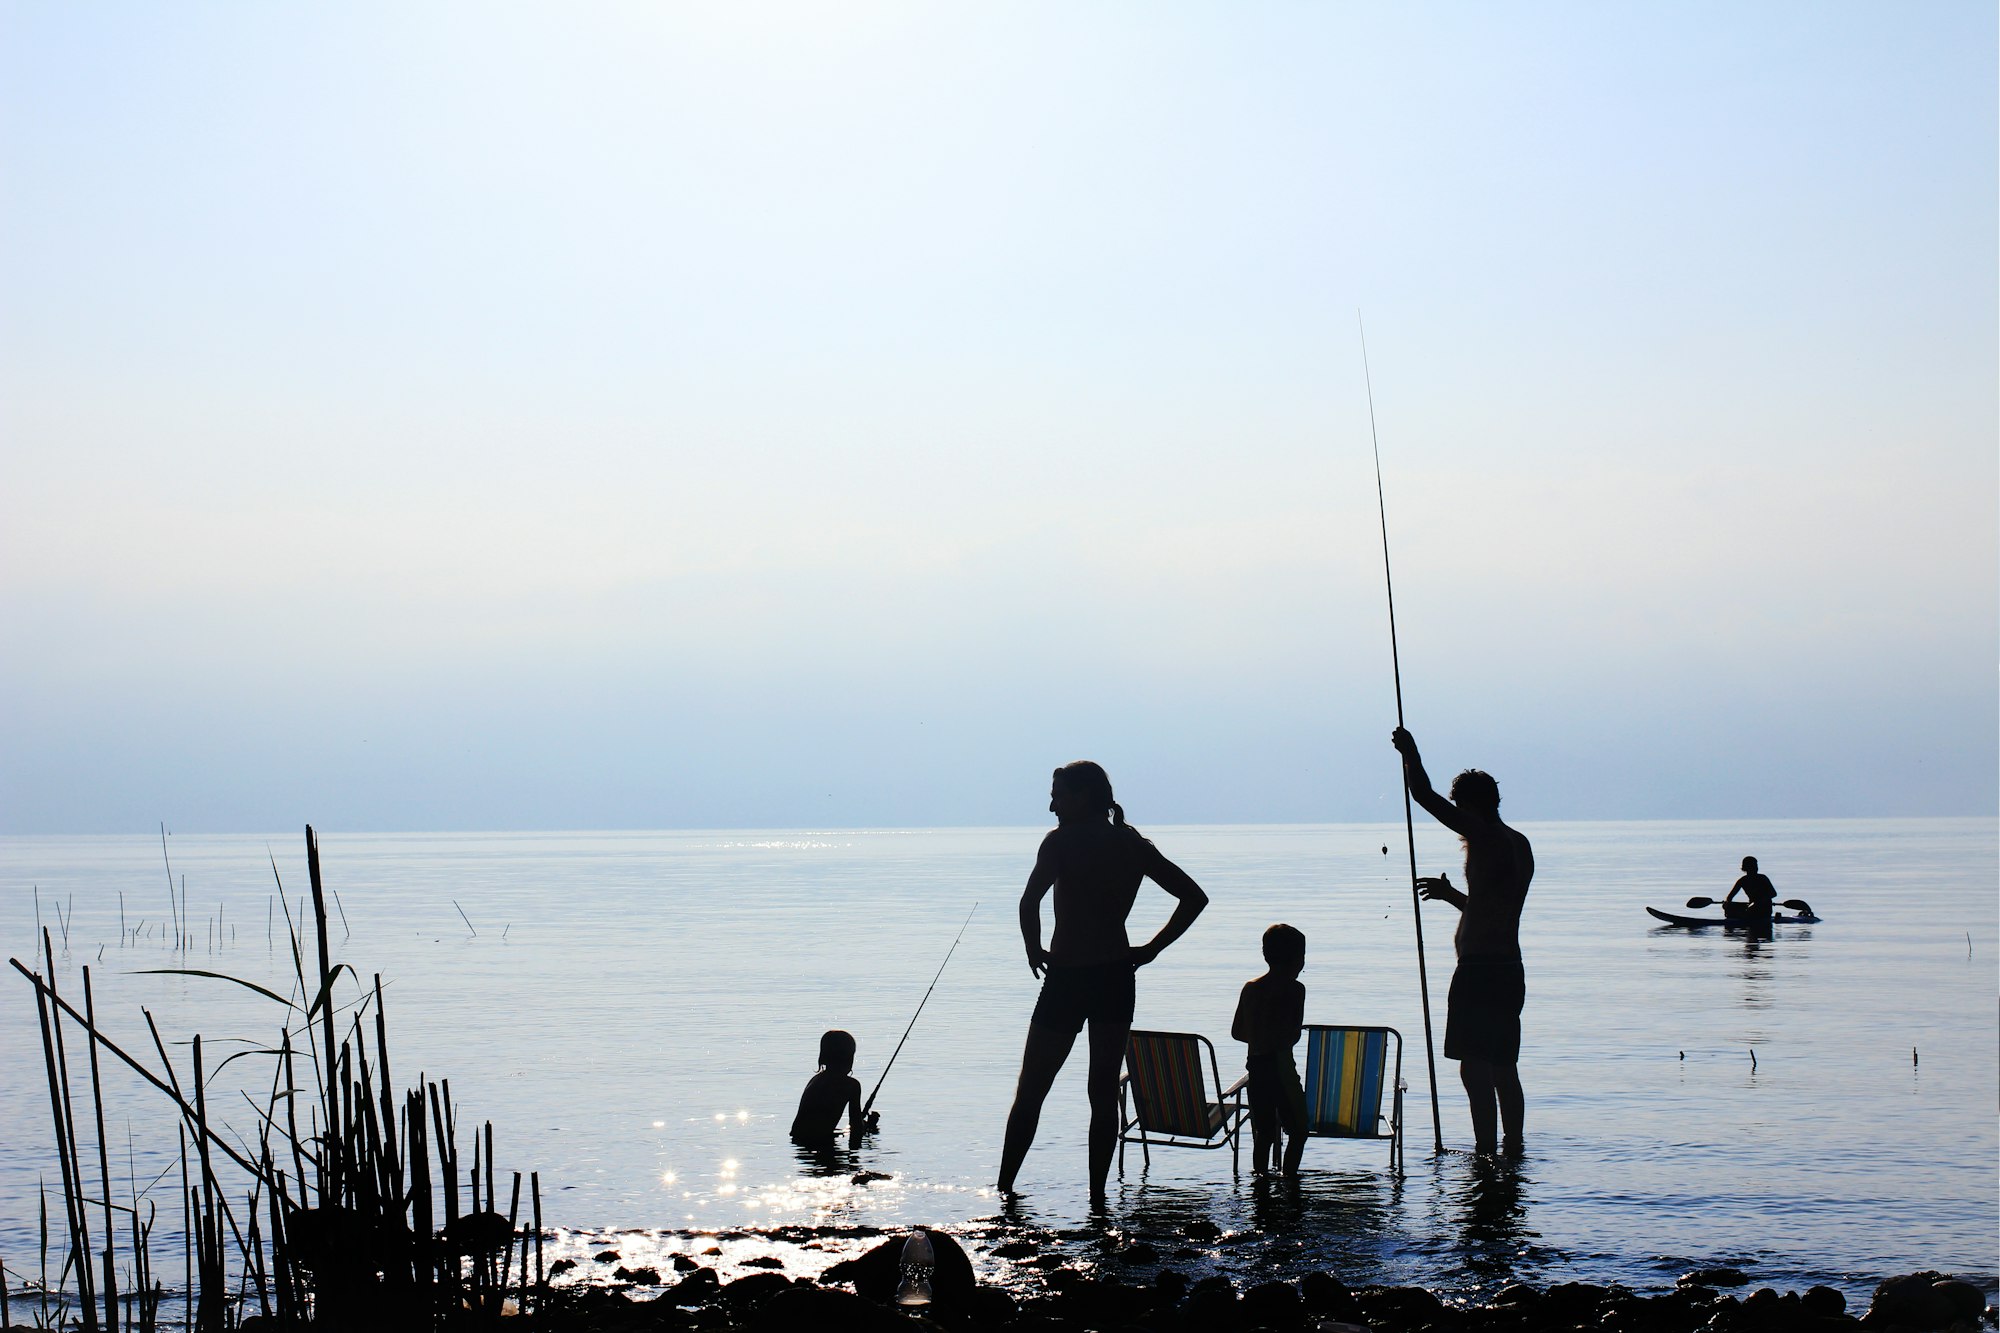 10 Awesome Family Fishing Vacation Ideas for Non-Anglers